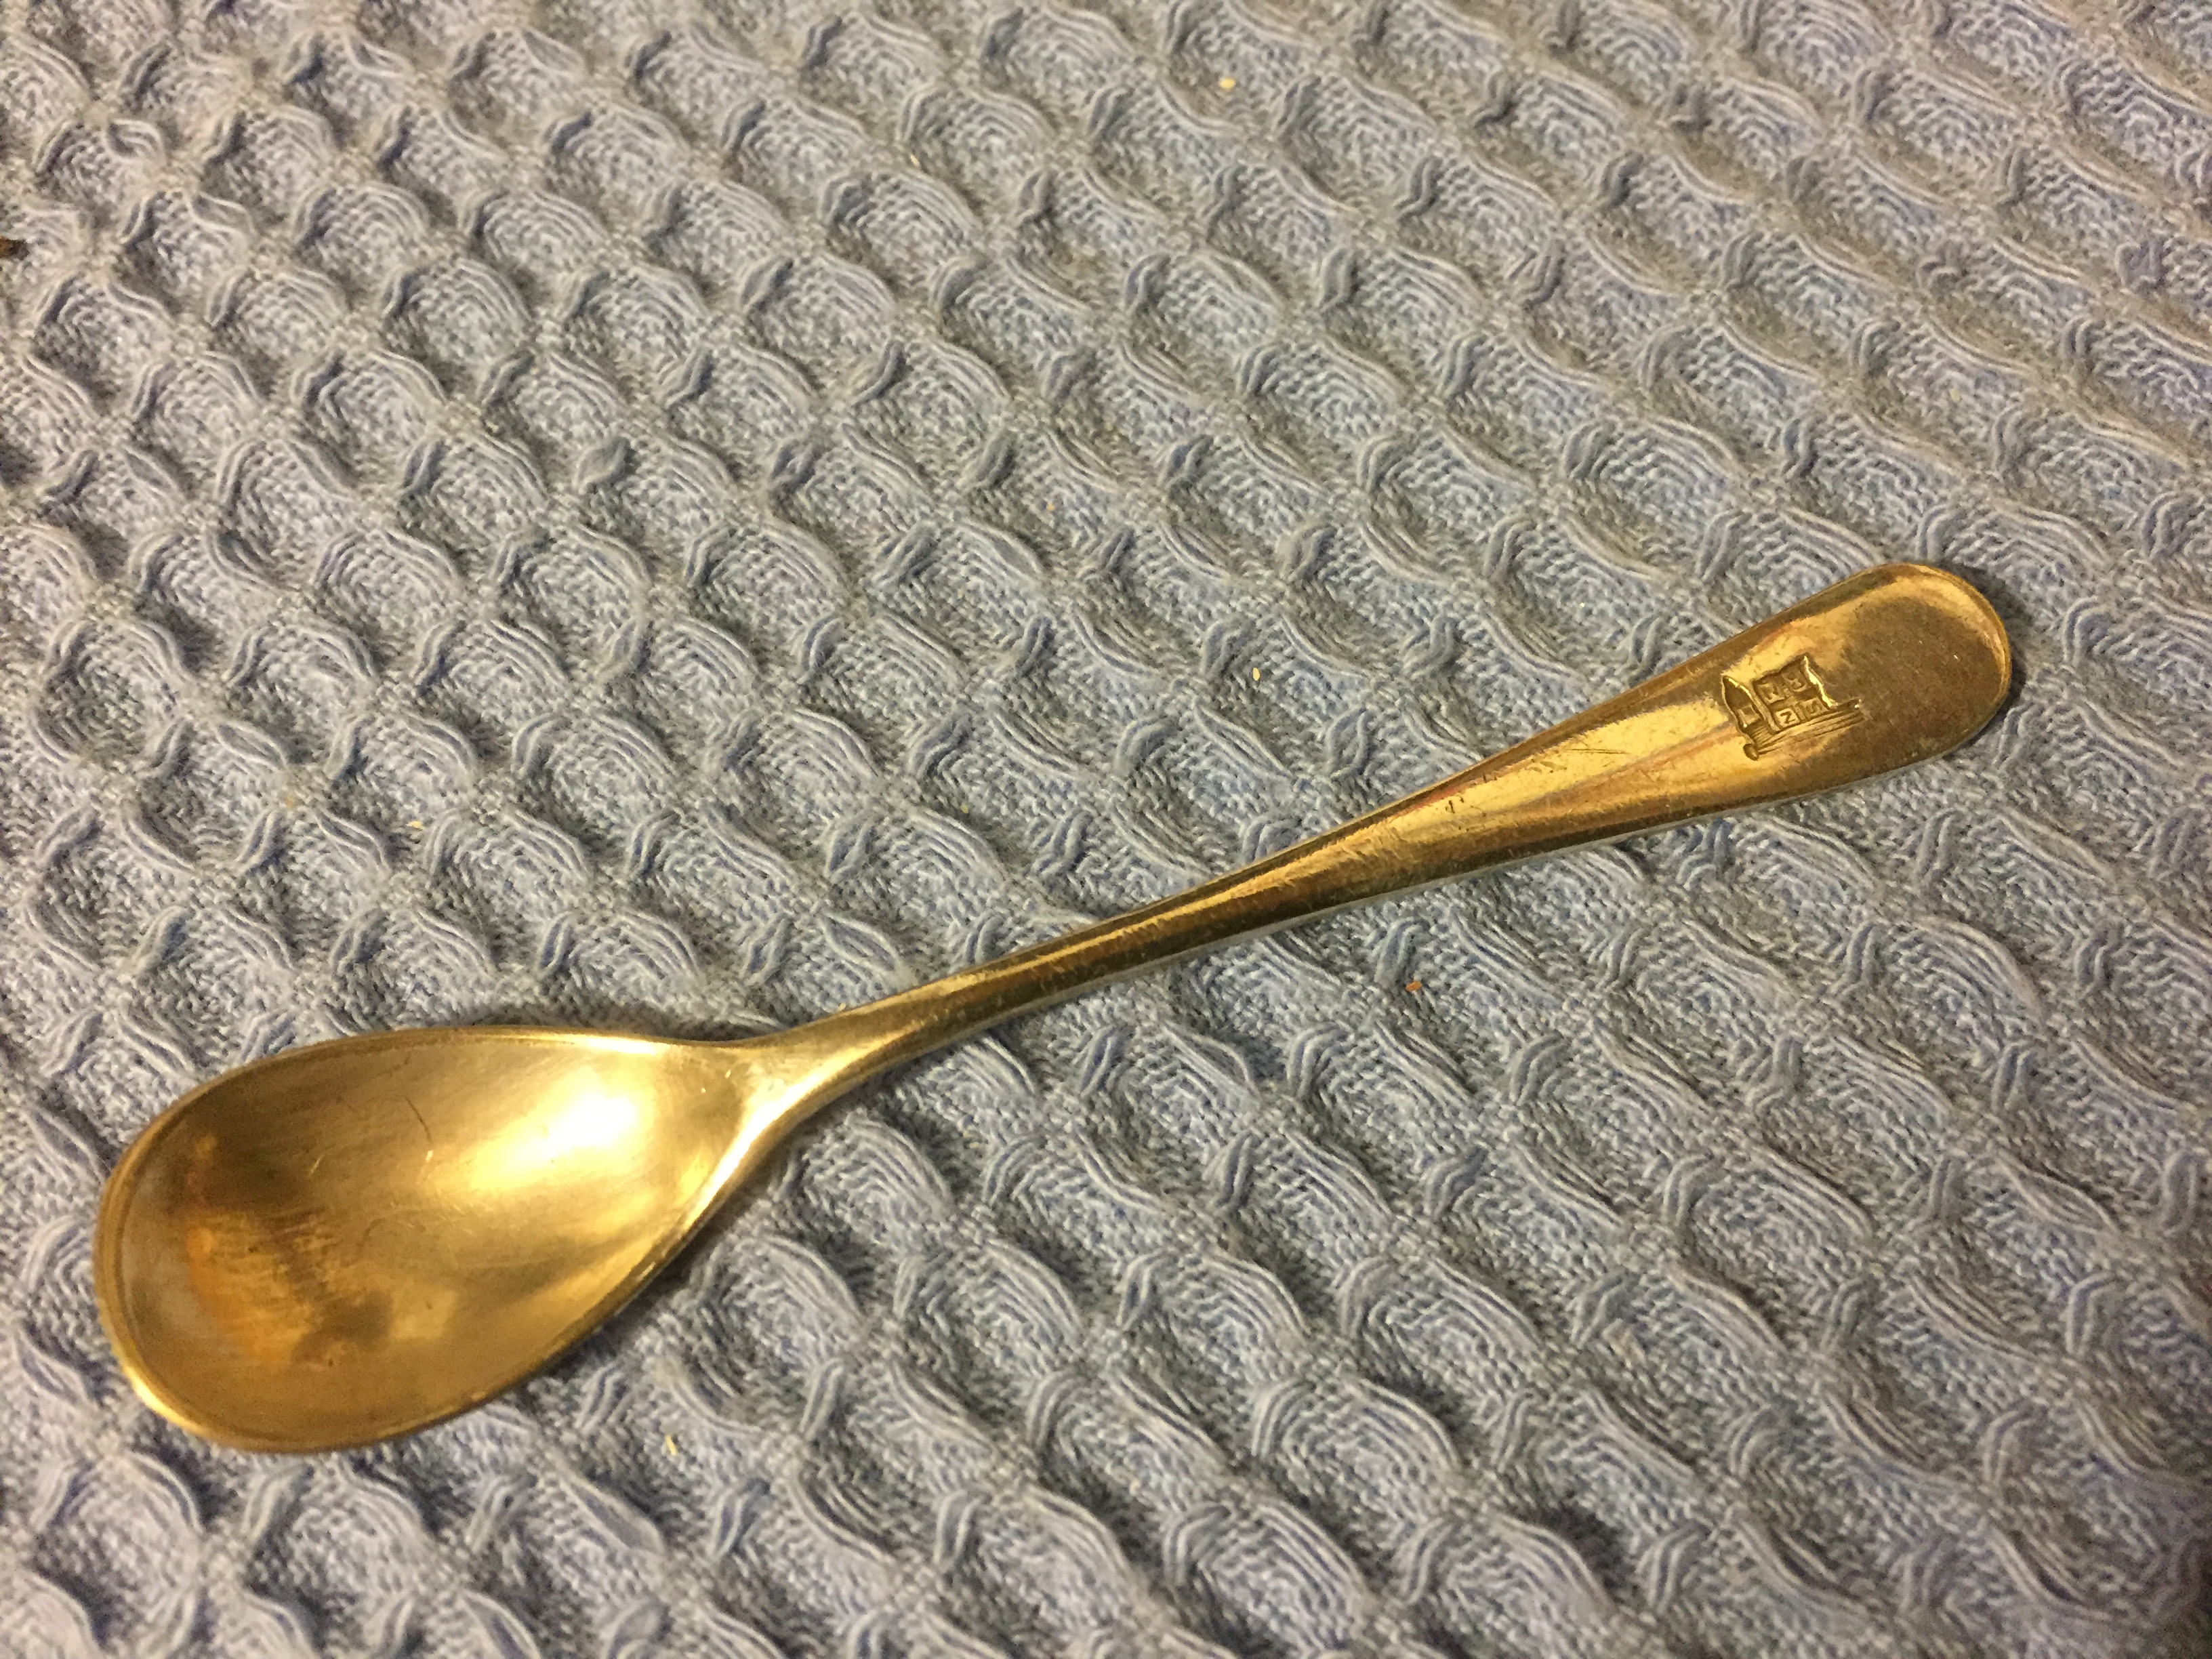 AS USED ON BOARD RARE FIND MUSTARD SPOON FROM THE NEW ZEALAND STEAMSHIP COMPANY 